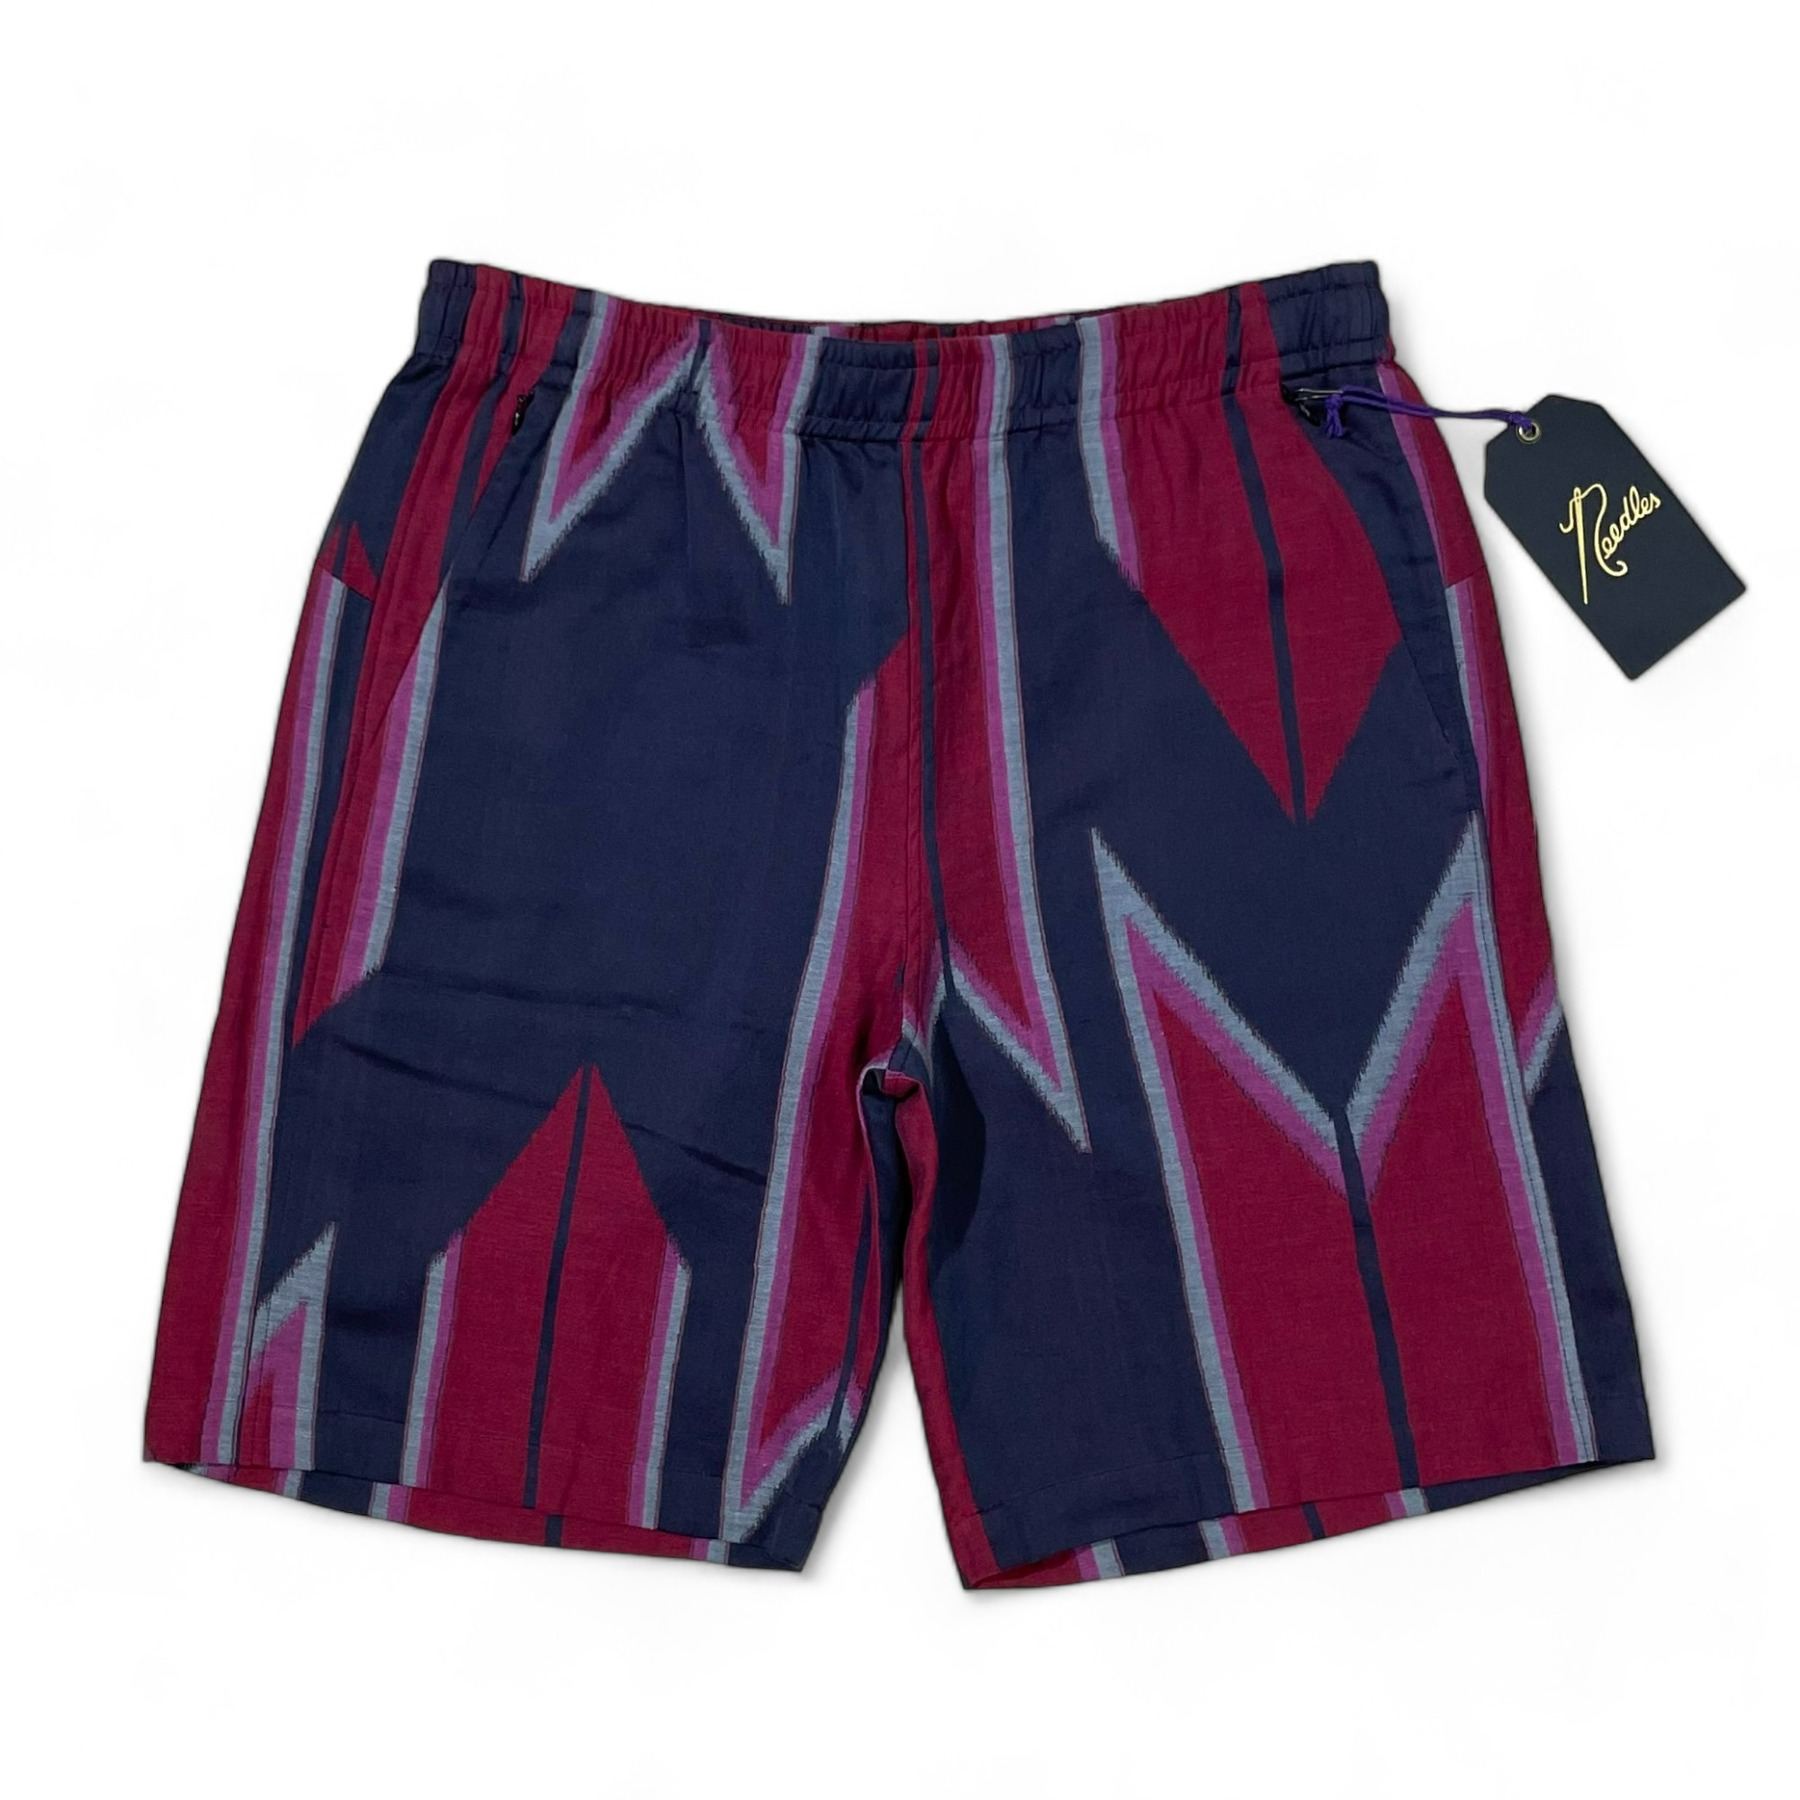 Needles Basketball Shorts Red Arrow (Made in JAPAN) - L